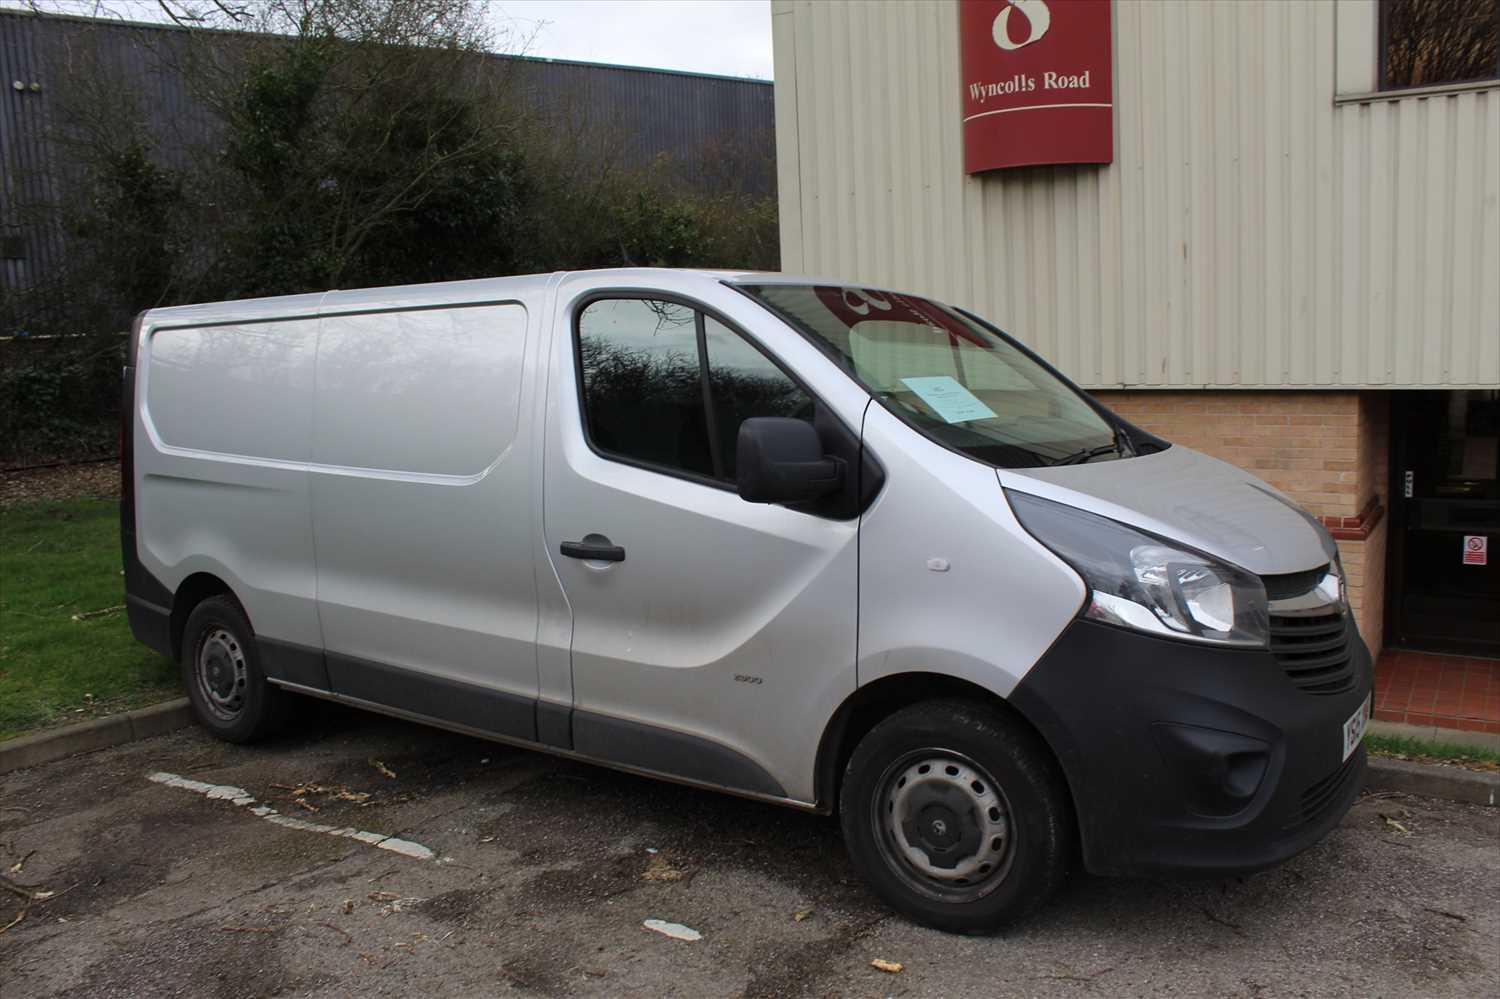 Lot 1 - 2015 Vauxhall Vivaro 2900, 2.0 CDTi Panel Van, Registration No. YS15 XMB, finished in silver, 81,713 miles, MOT until 4th July 2020, Supplied with service history, V5 and 1 key.  
 N.B.  There is n...